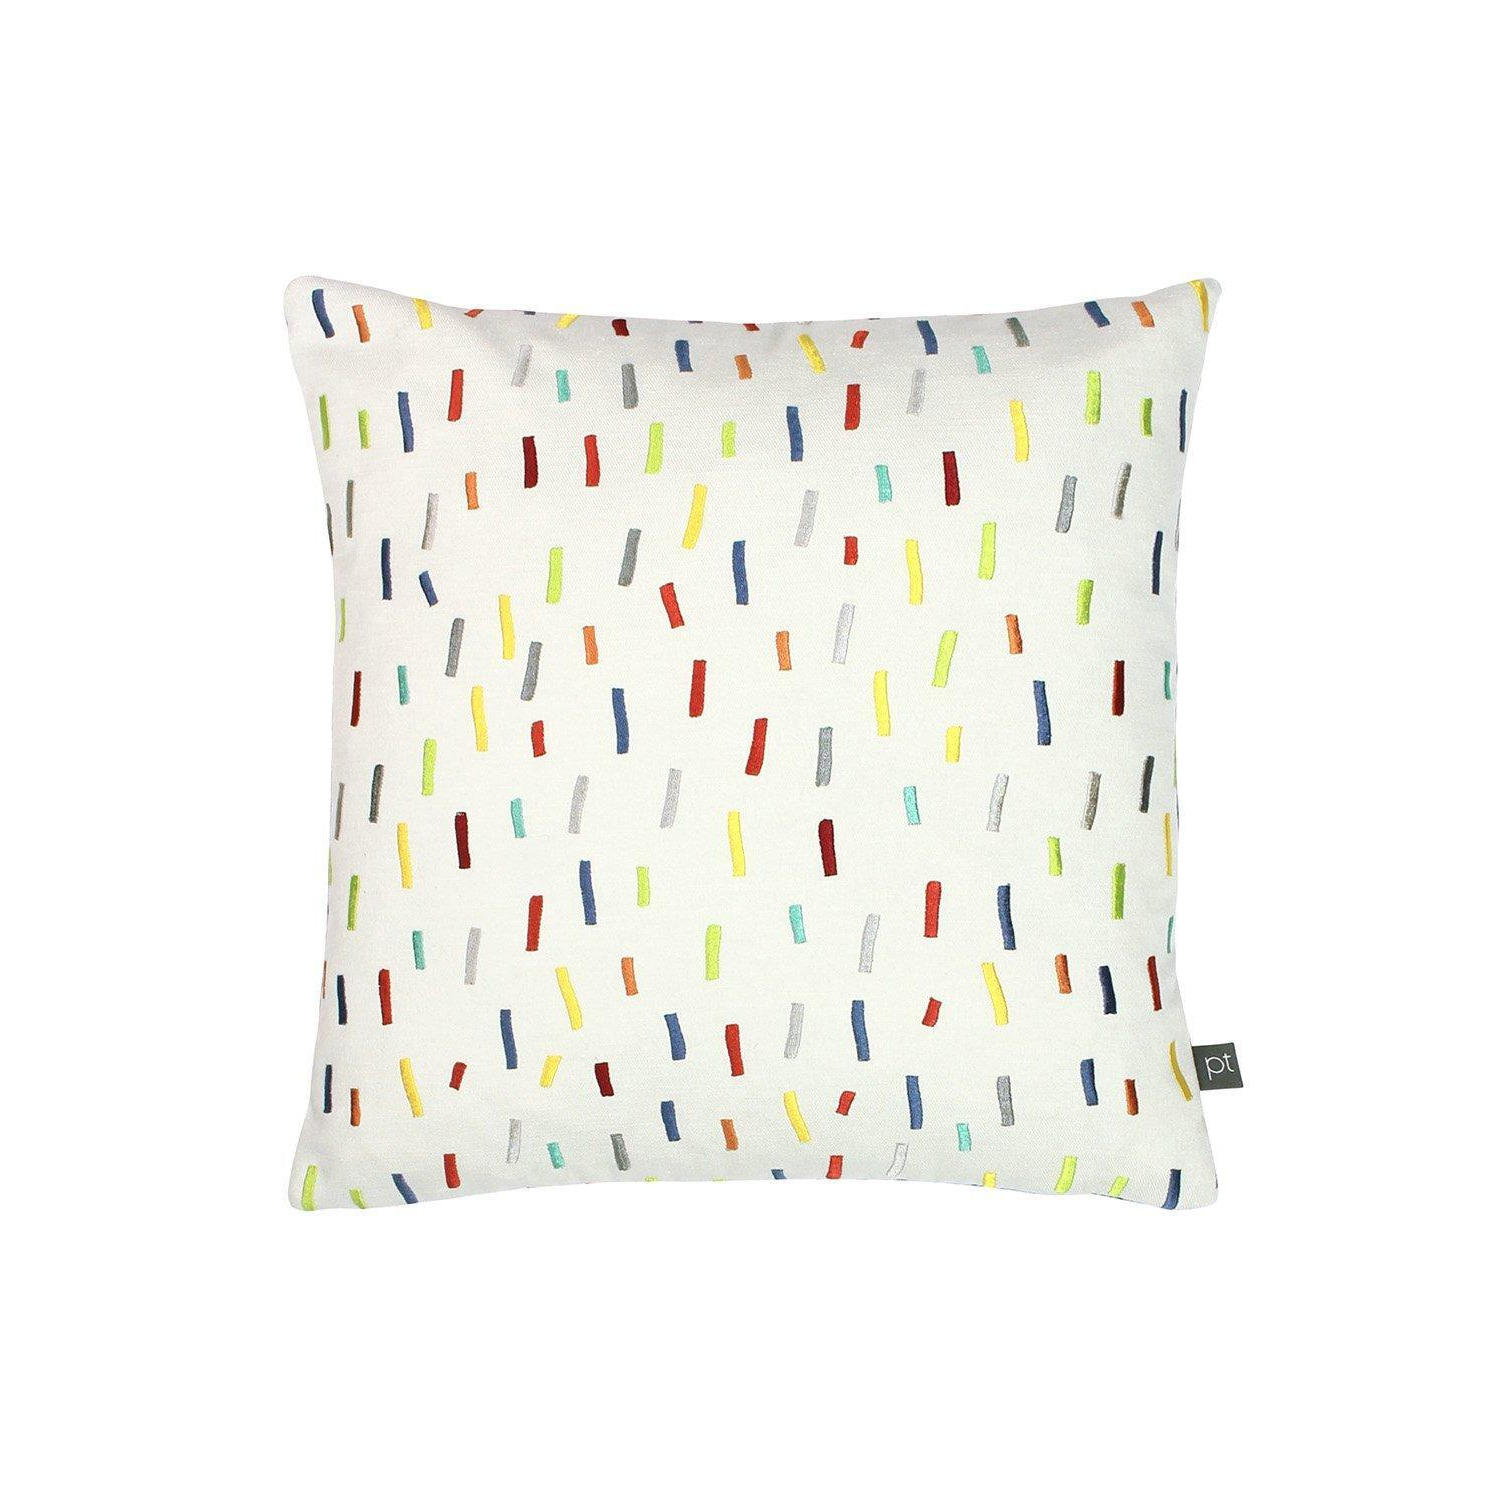 Dolly Mixture Embroidered Soft Velvet Cushion - image 1